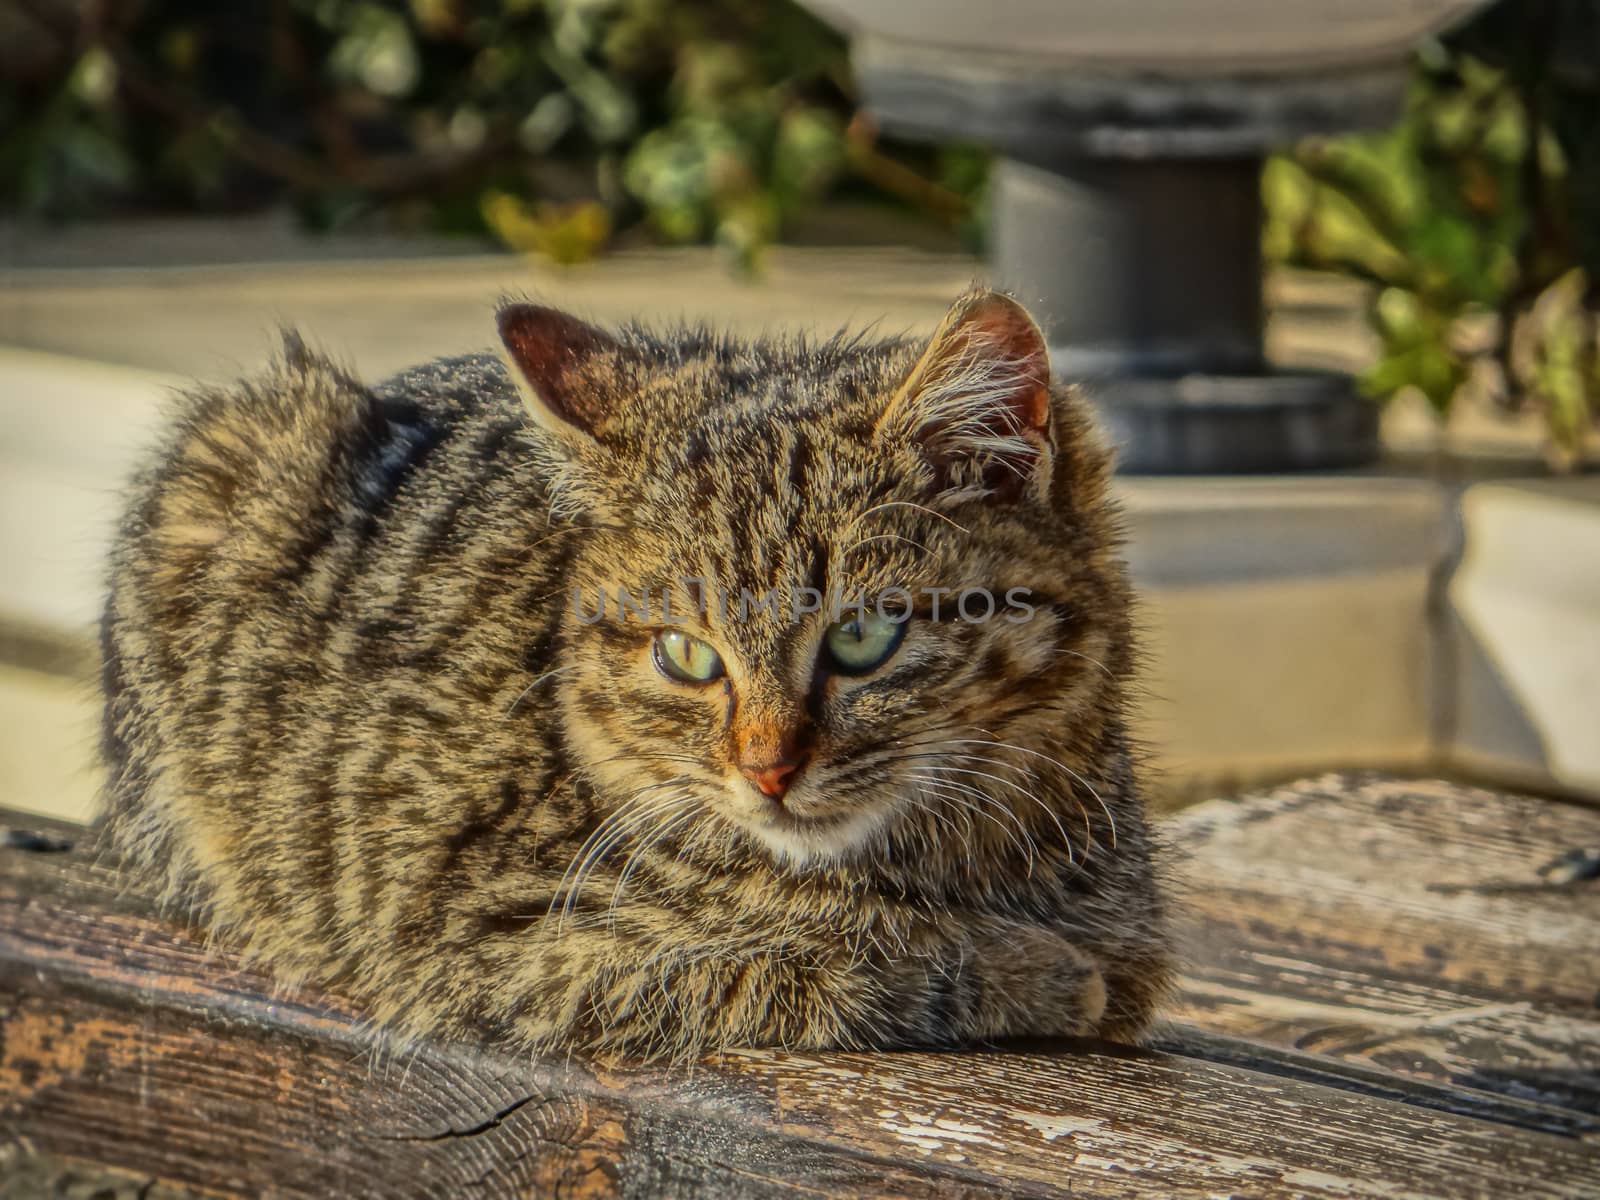 Small and fuzzy street kitty cat sunbathing on a wooden bench.